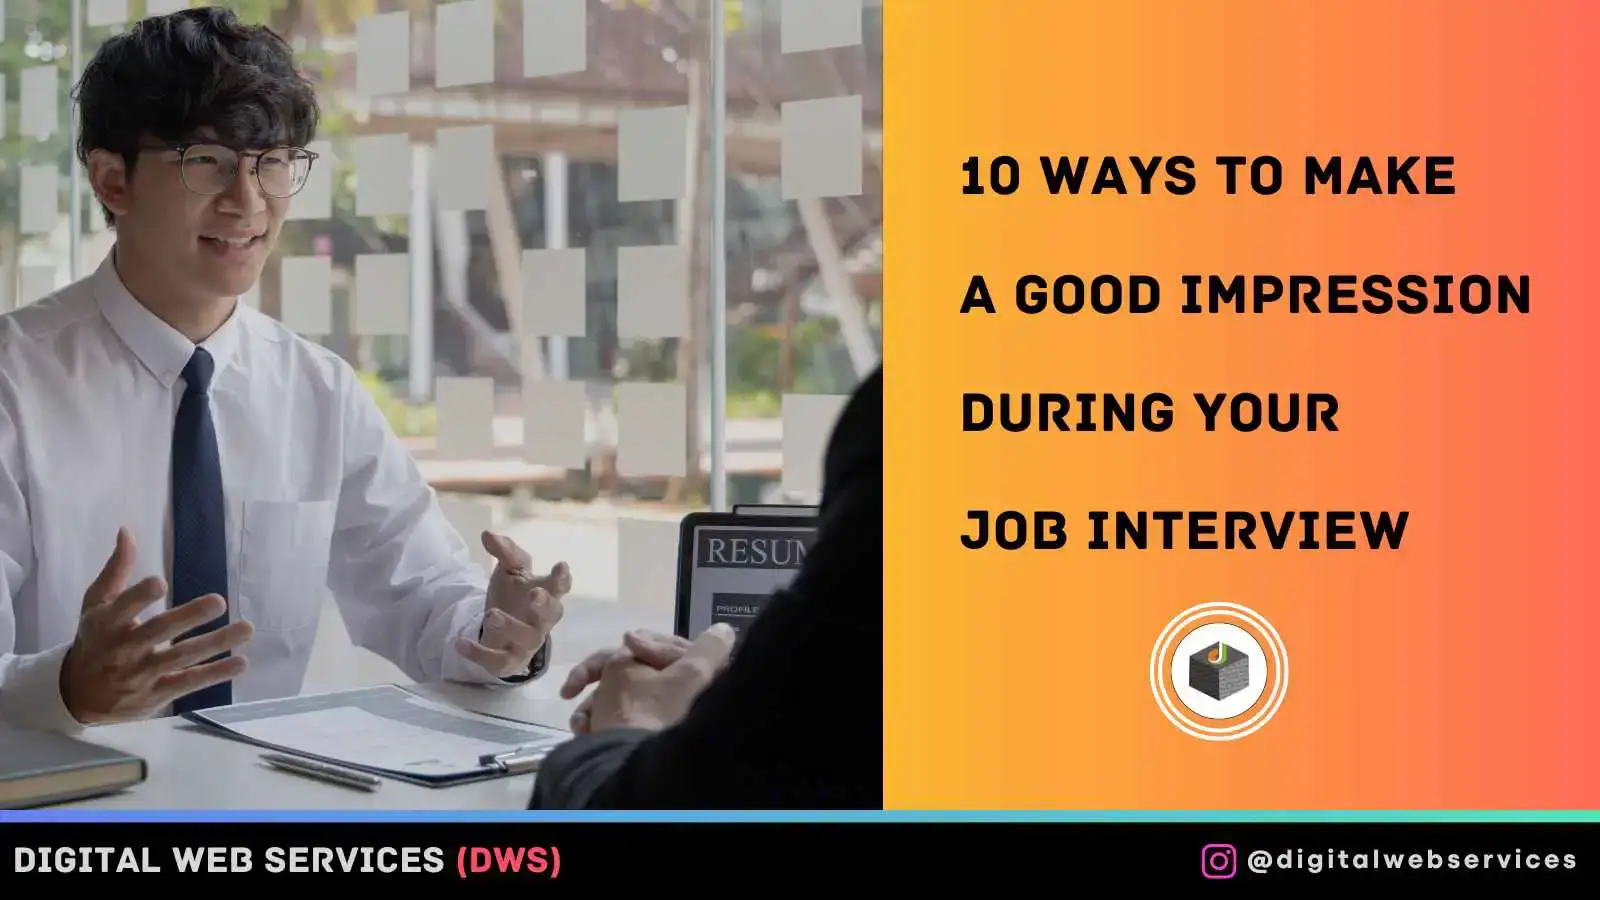 10 Ways to Make A Good Impression During Your Job Interview